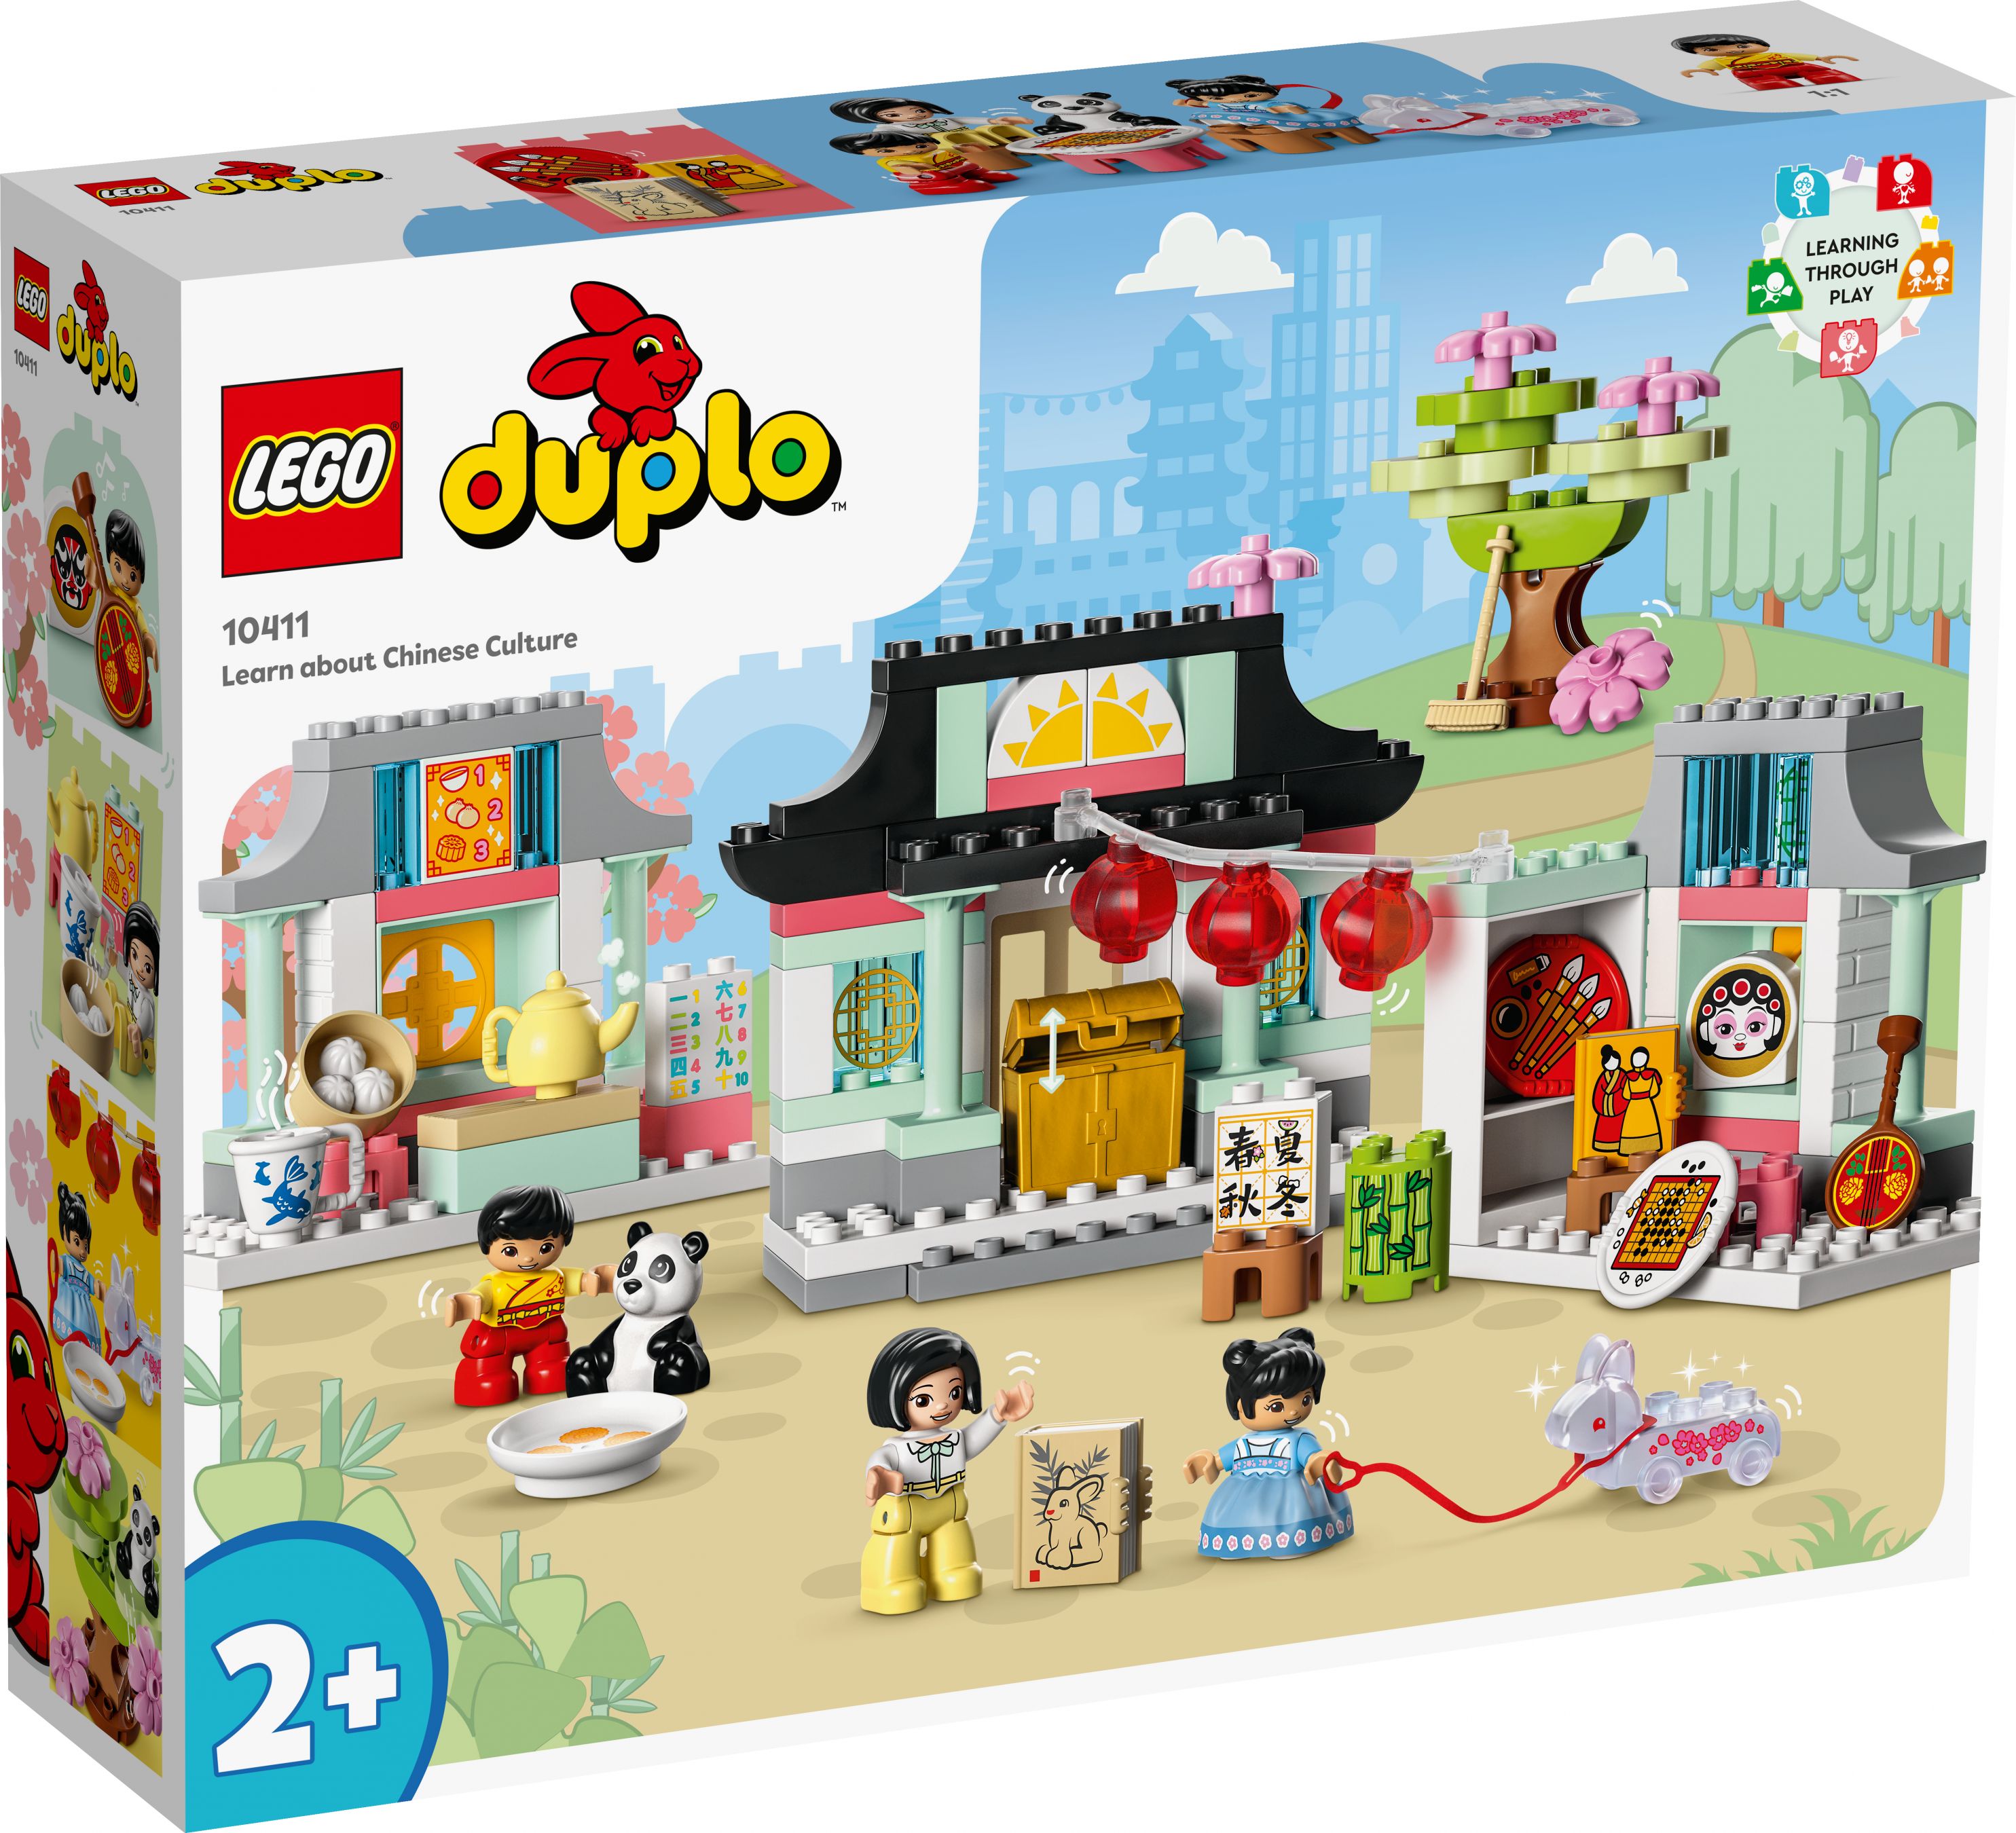 LEGO Duplo 10411 Learn about Chinese Culture LEGO_10411_Box1_v29.jpg